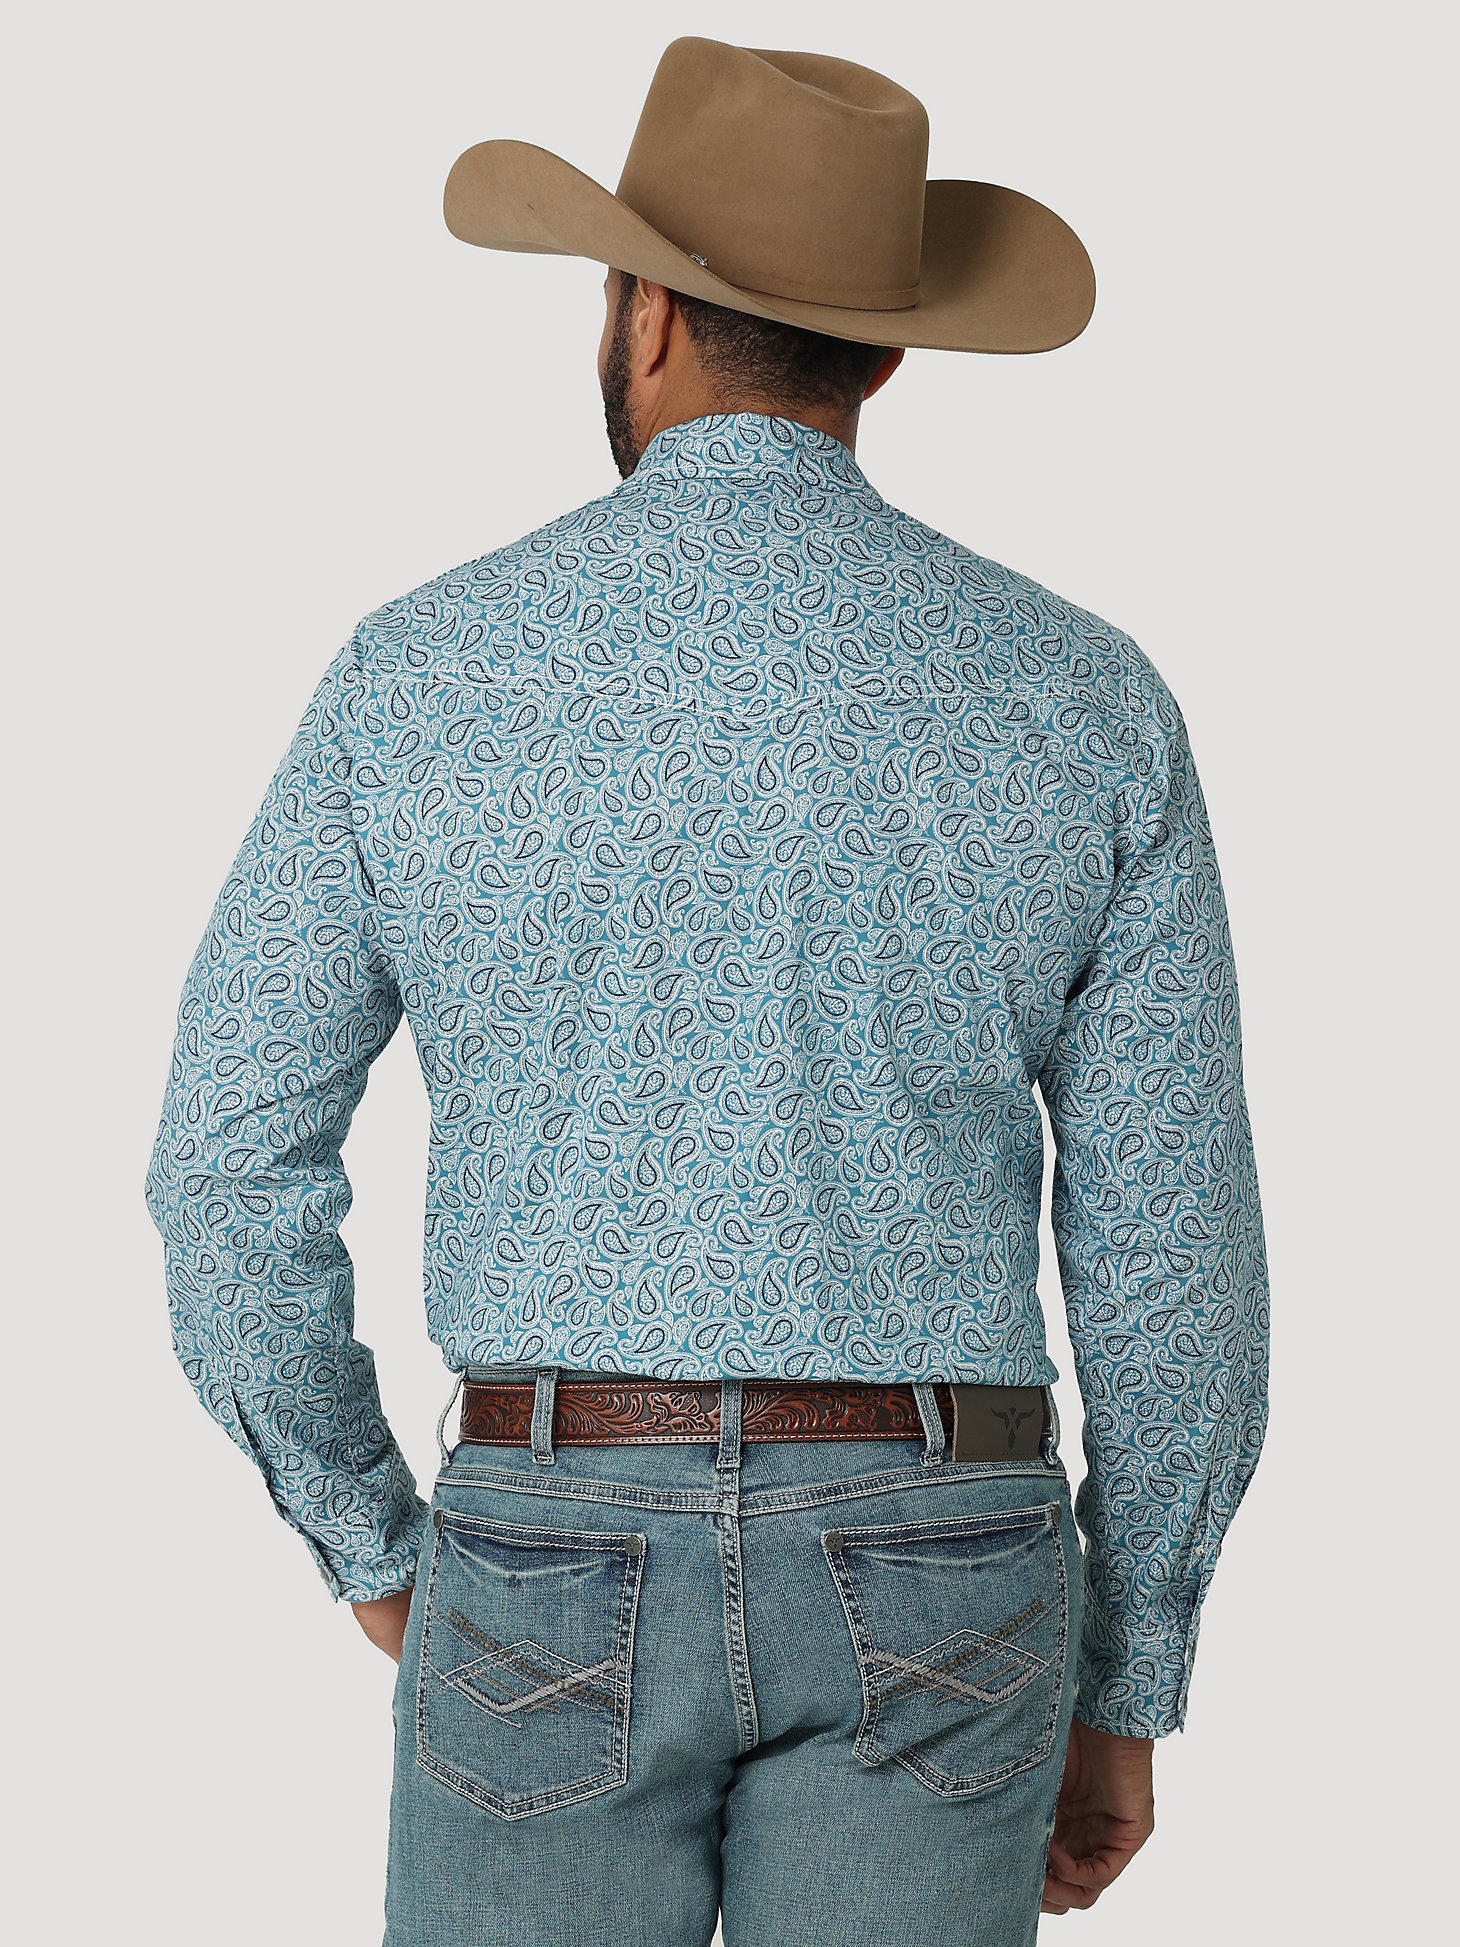 Men's Wrangler® 20X® Competition Advanced Comfort Long Sleeve Western Snap Print Shirt in Dusty Teal alternative view 1